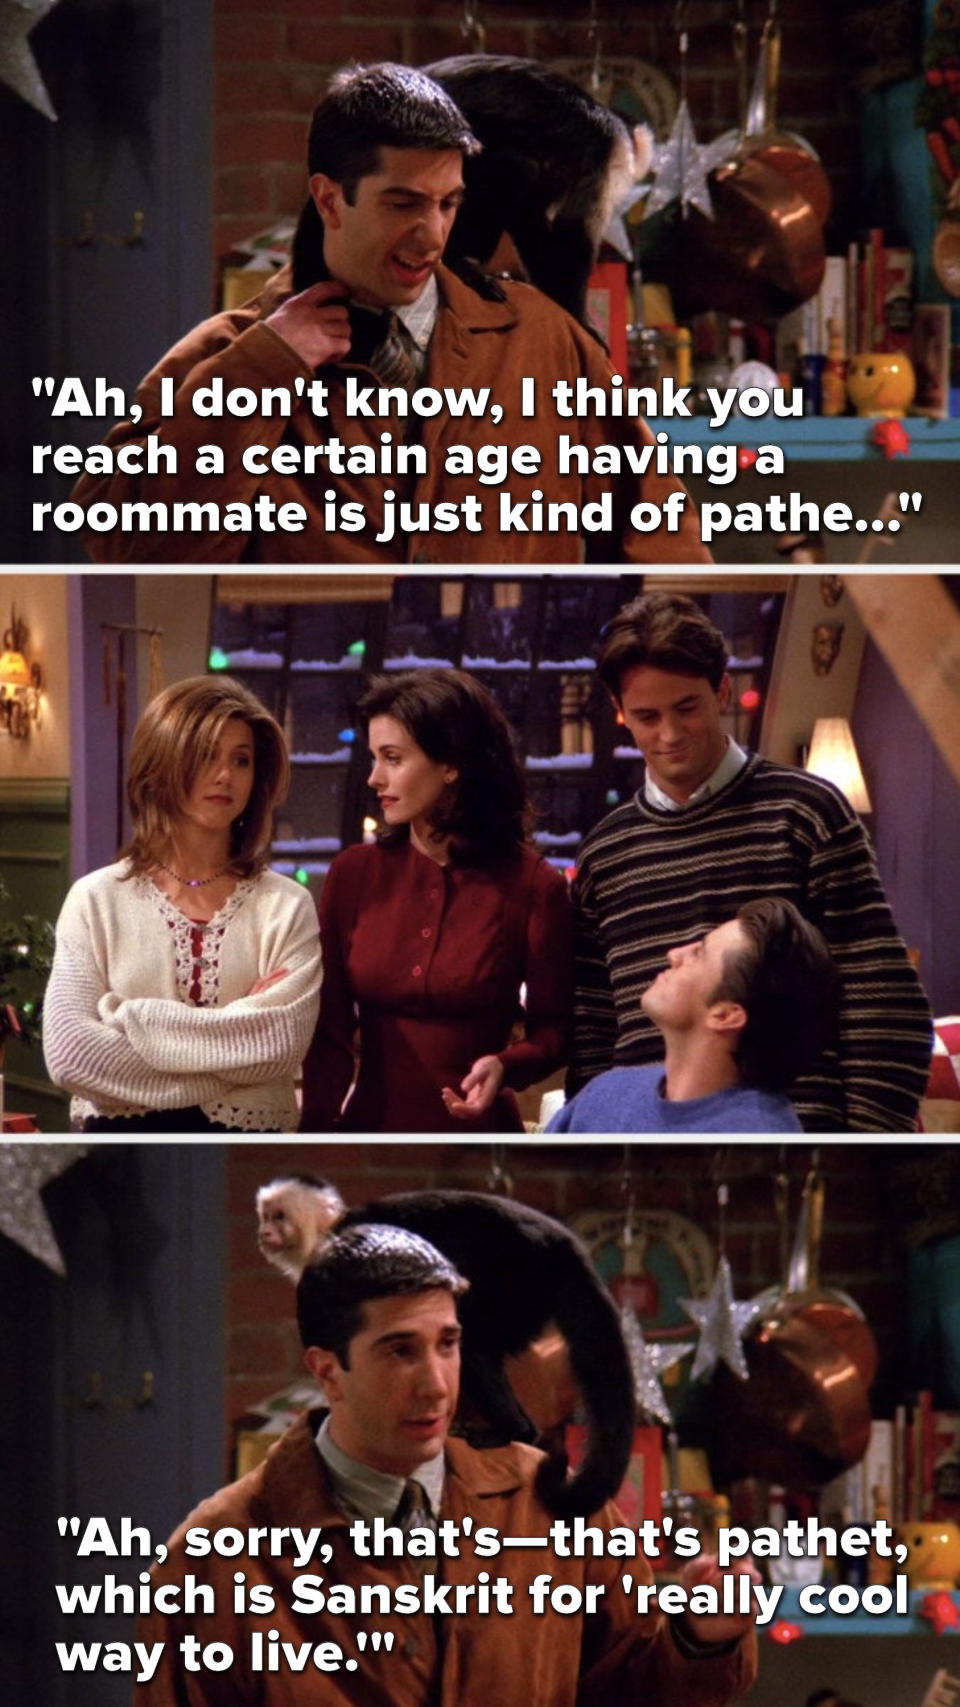 Ross says, "I think you reach a certain age having a roommate is just kind of pathe..." Rachel and Monica look at each other and Joey and Chandler look at each other, and Ross says, "that's pathet, which is Sanskrit for 'really cool way to live'"